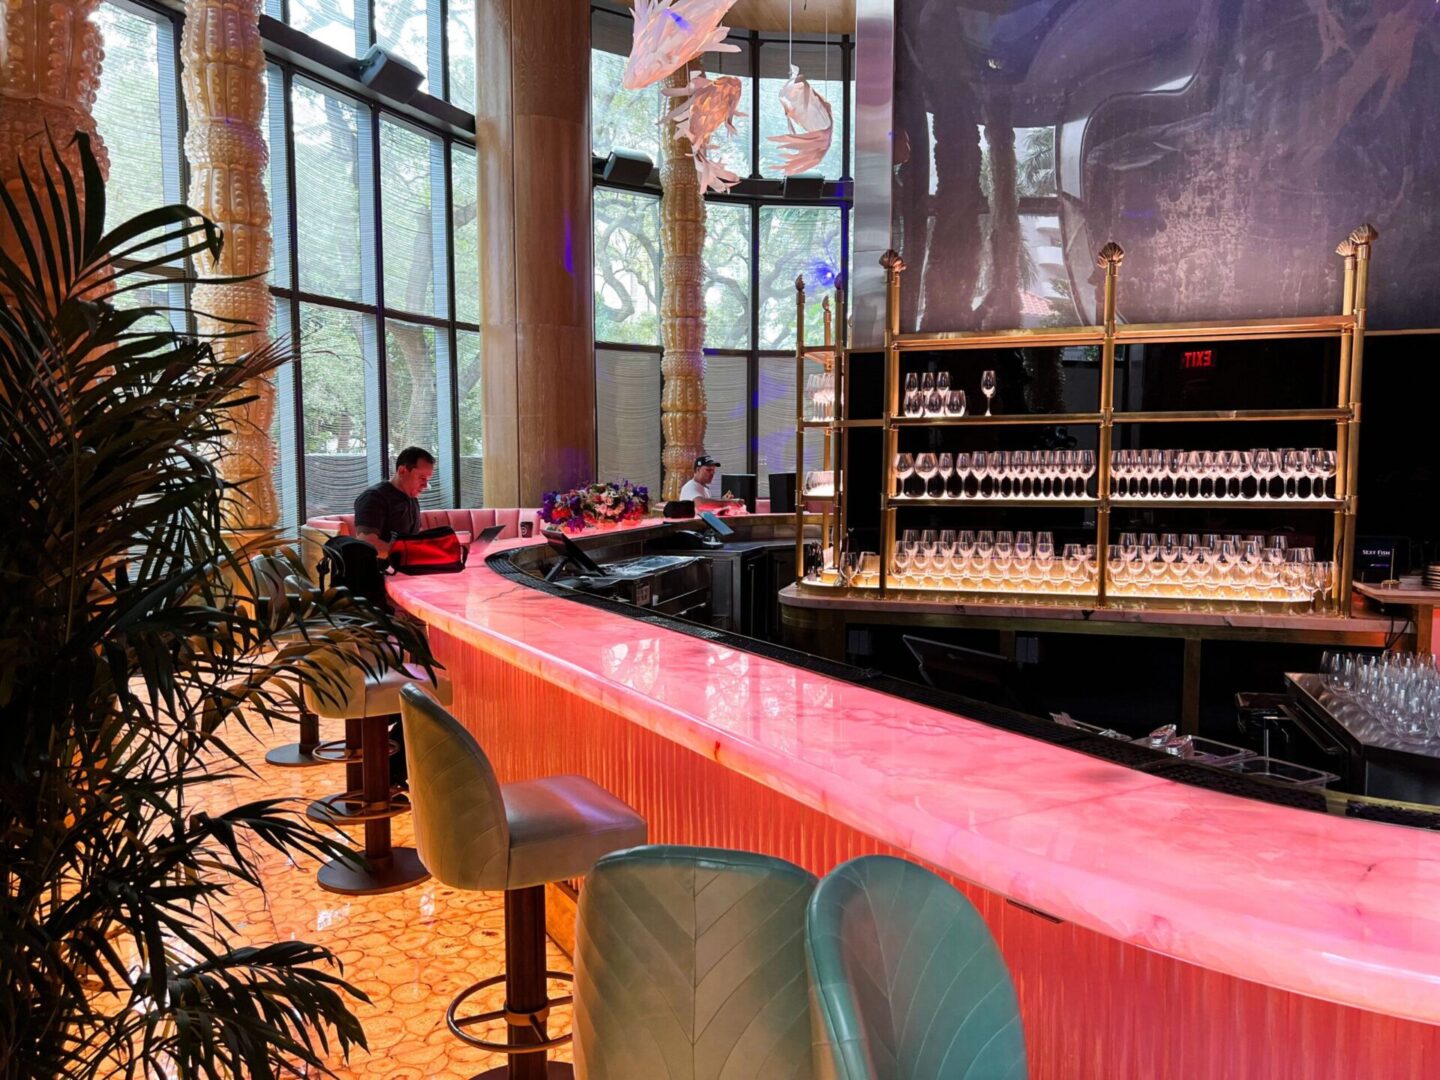 A bar with pink counter and chairs in front of a large window.